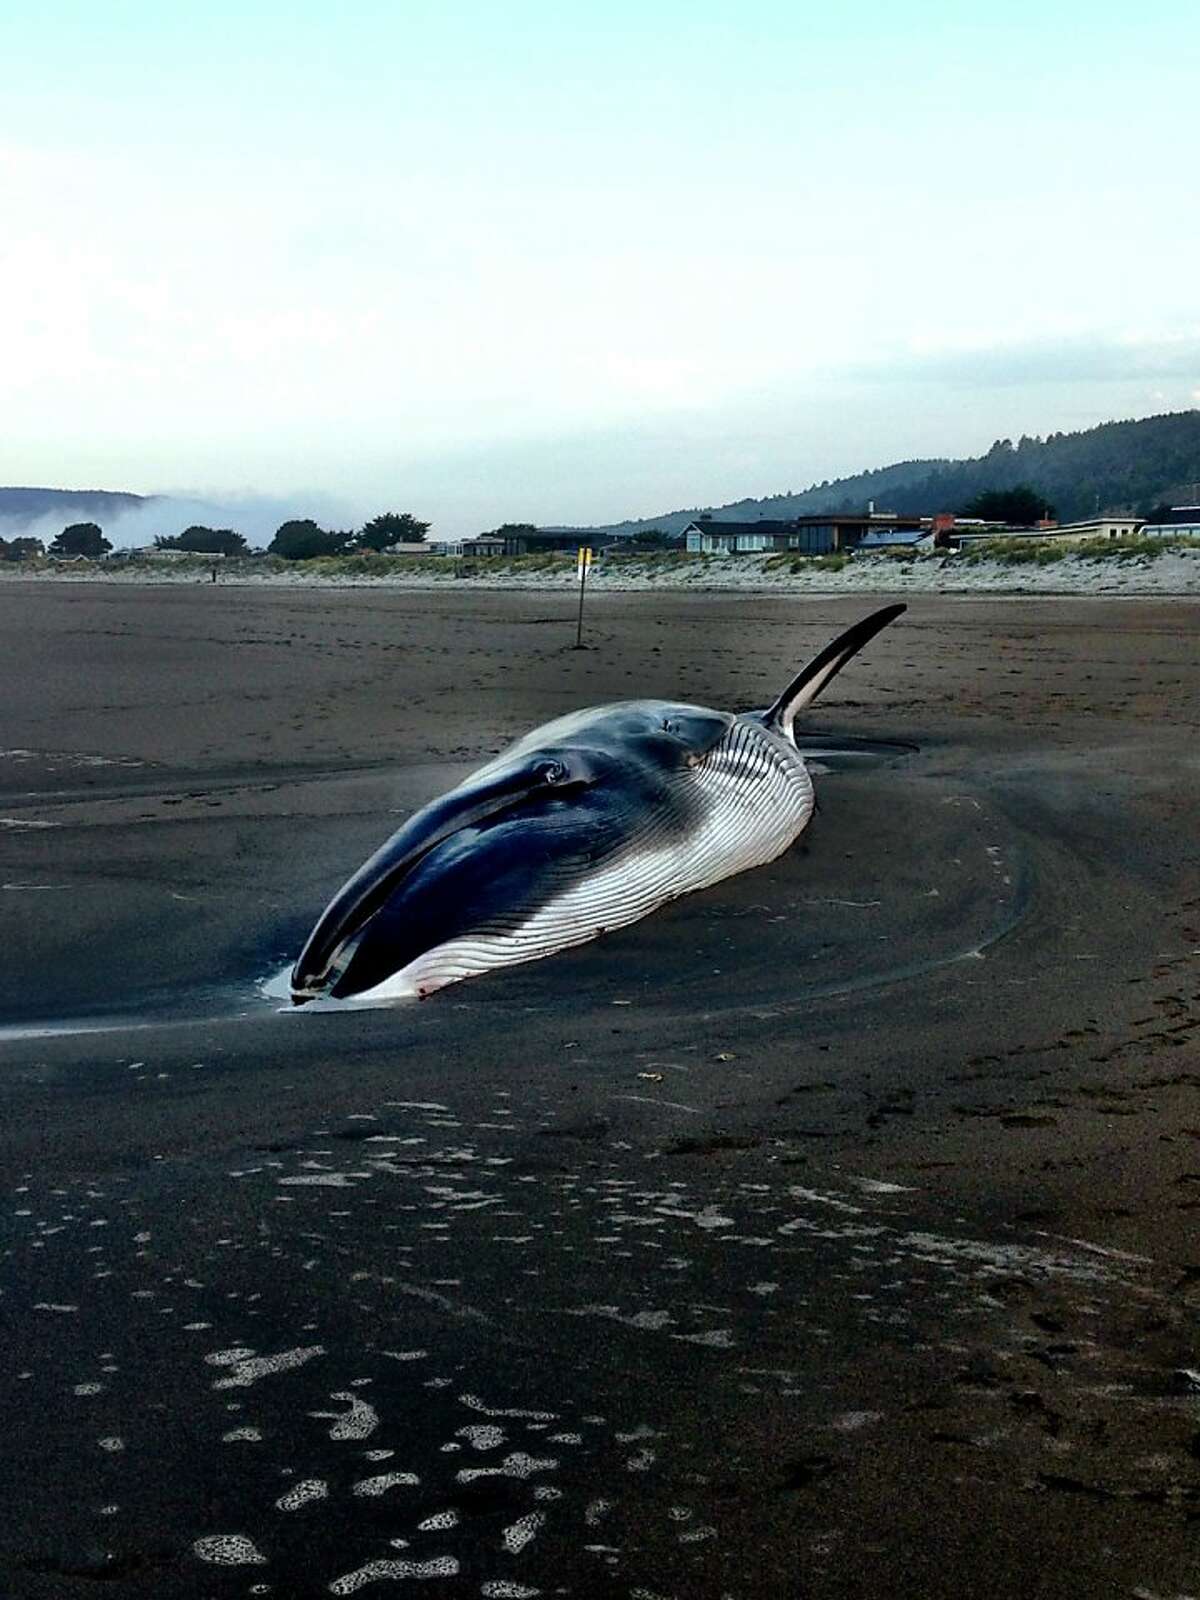 A 42-foot fin whale calf died after it beached itself in Stinson Beach, Calif., Monday, August 19, 2013.